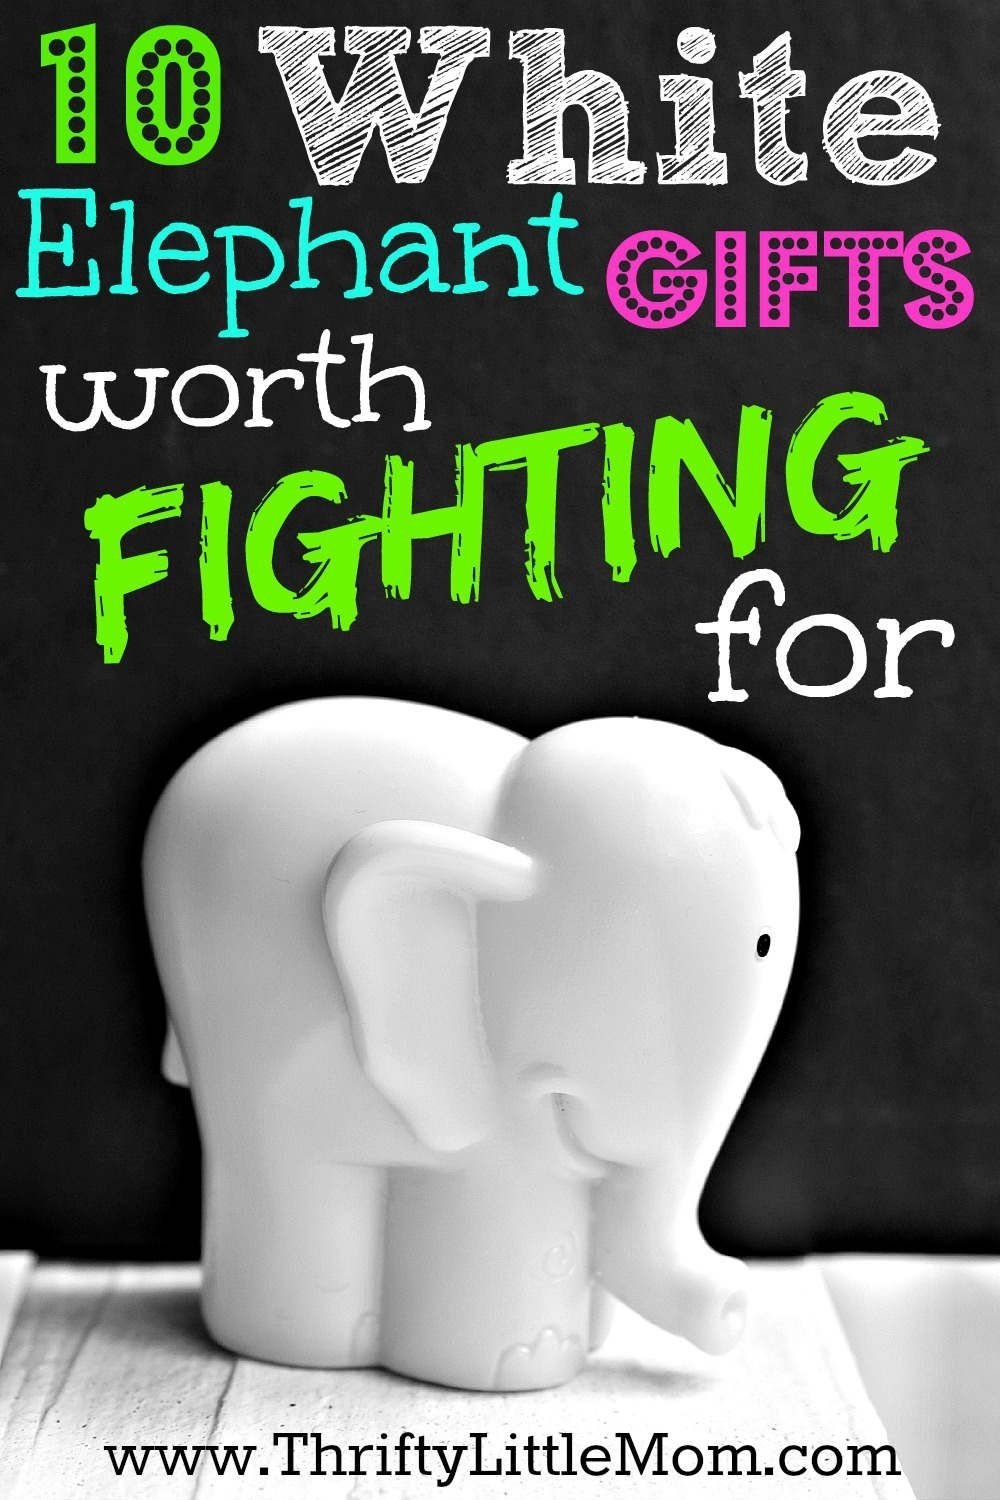 10 Lovely Best Yankee Swap Gift Ideas white elephant gifts worth fighting for yankee swap ideas white 15 2023